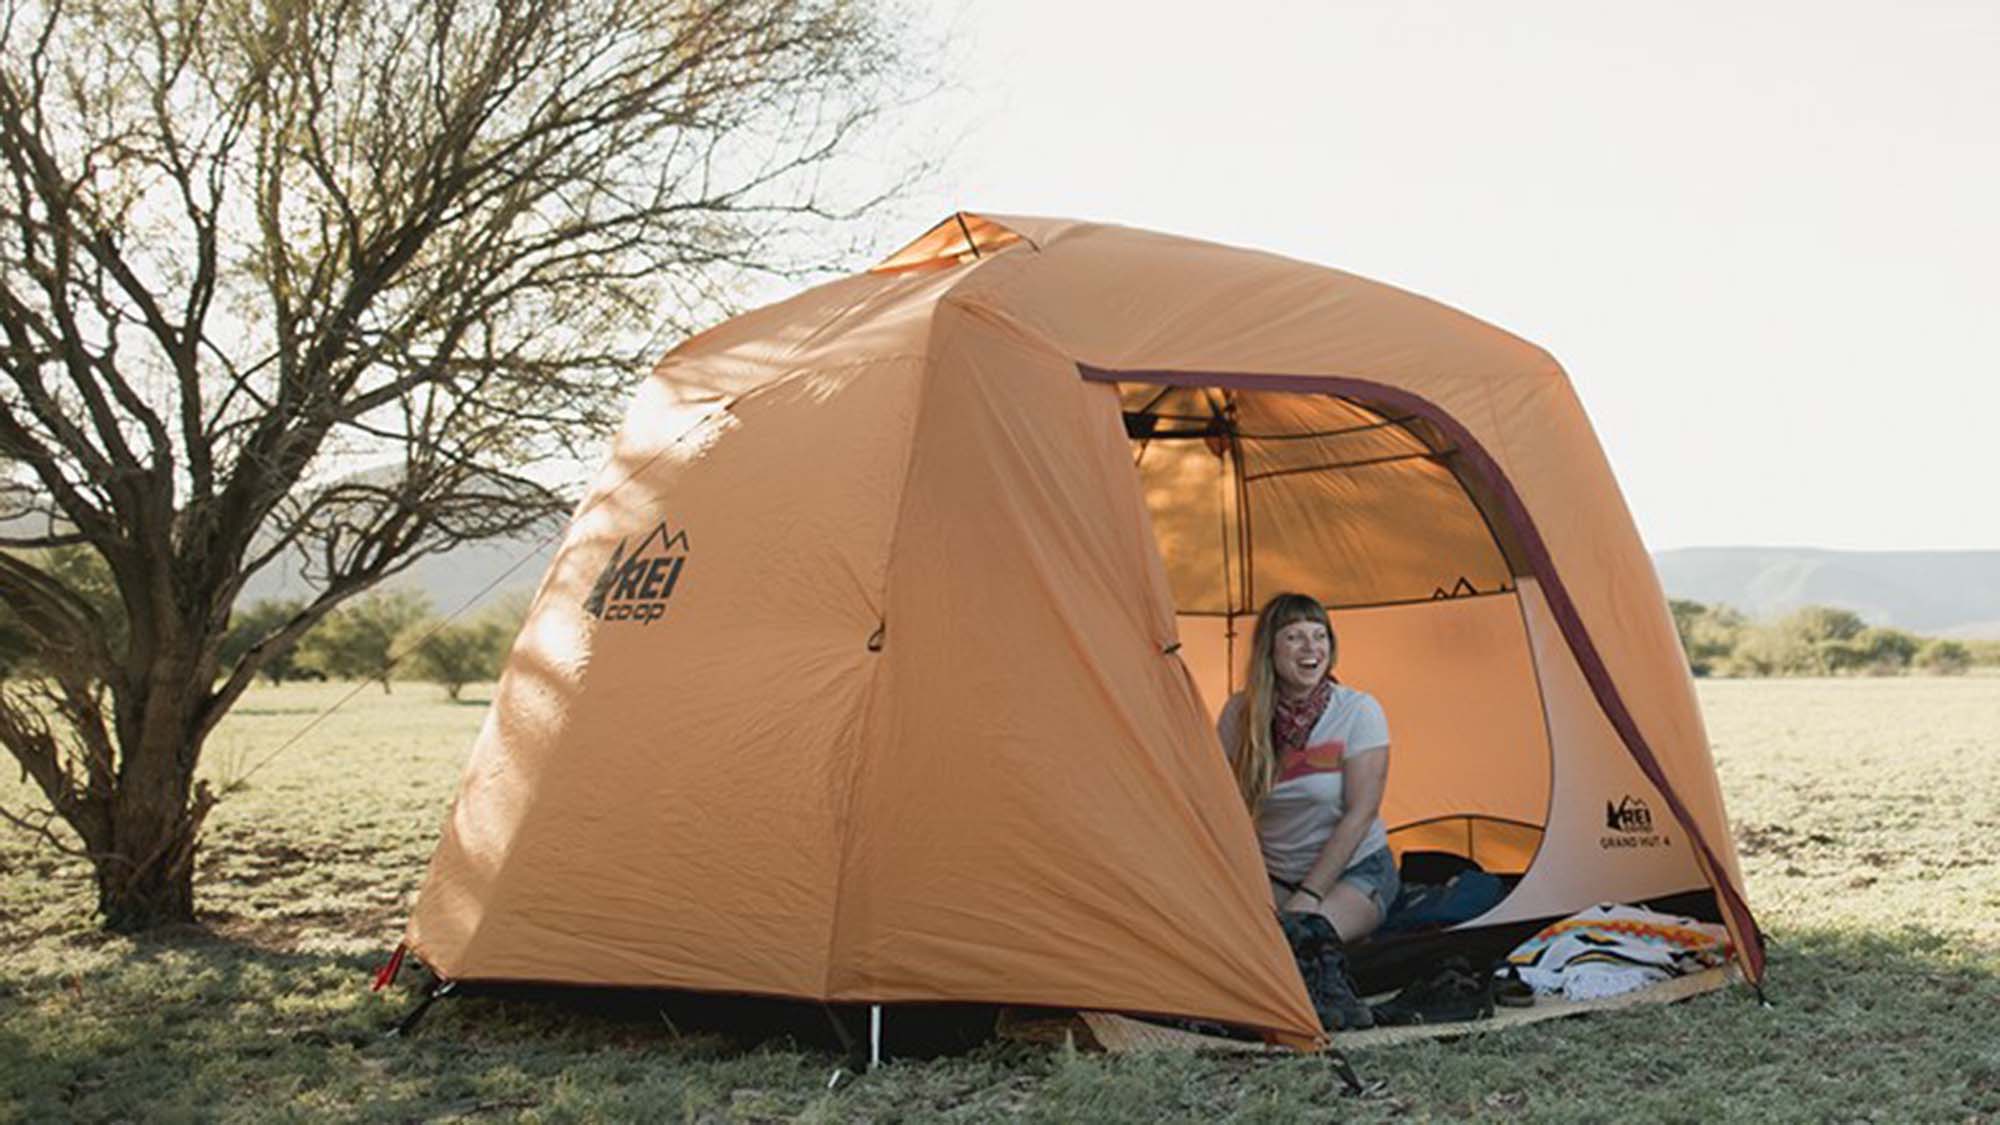 Save 20% on a regular-price and outlet item at this members-only REI event | CNN Underscored